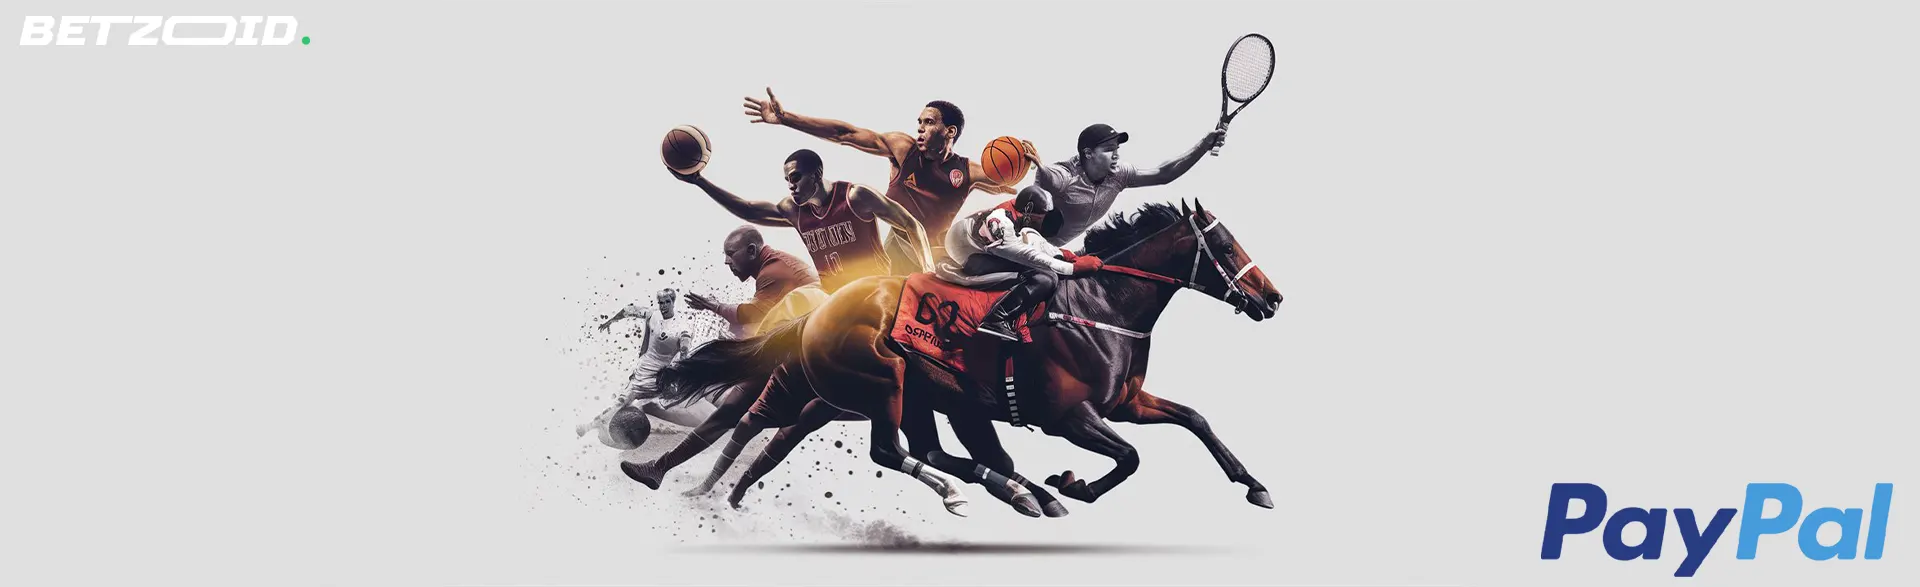 PayPal logo and various athletes including a jockey on a horse for horse betting sites that accept PayPal.